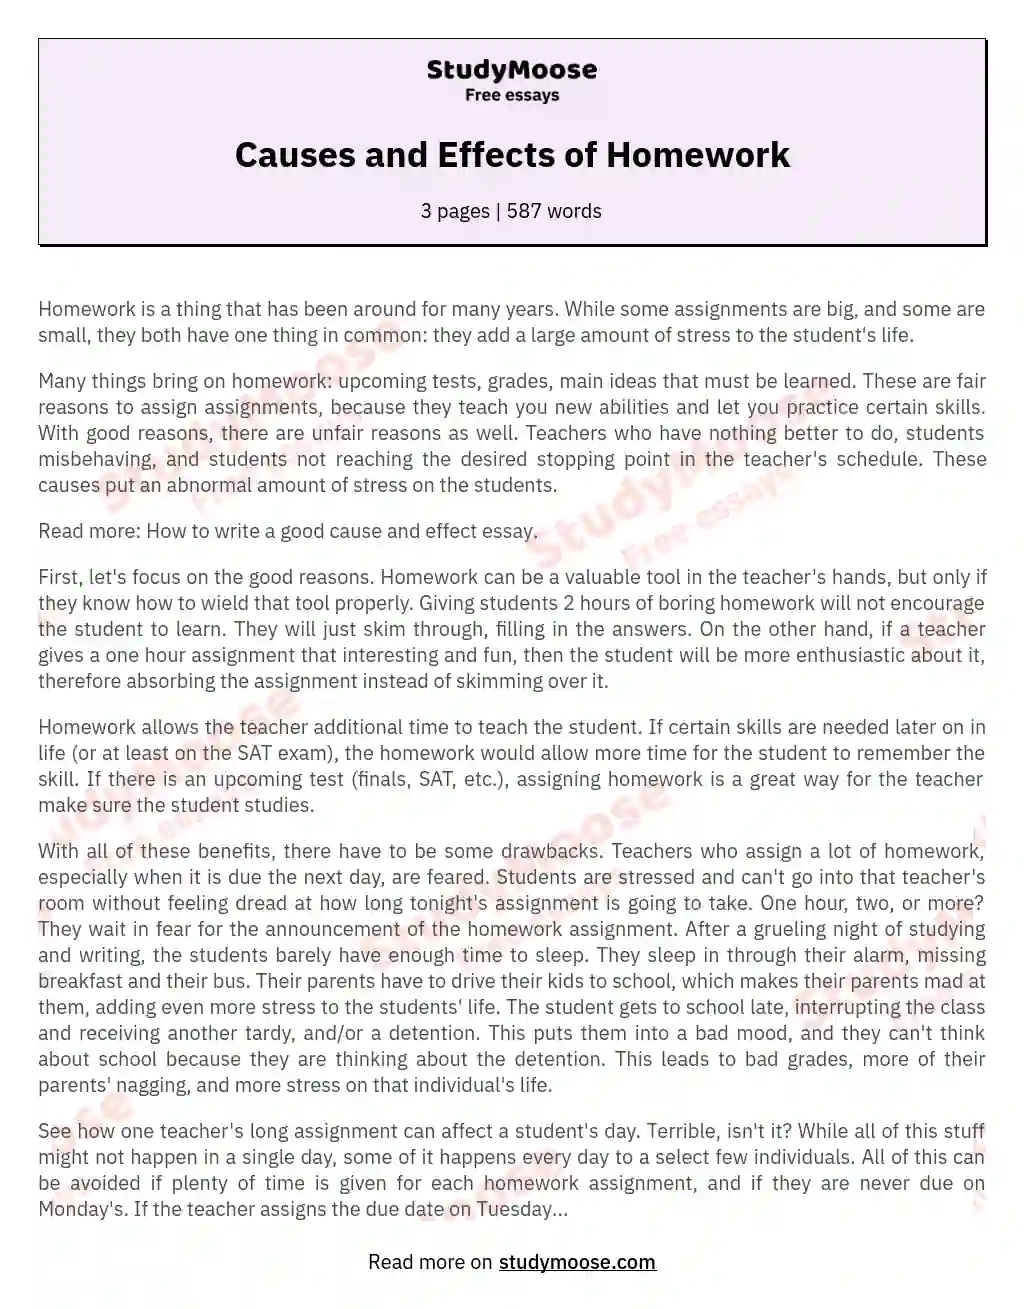 Causes and Effects of Homework essay